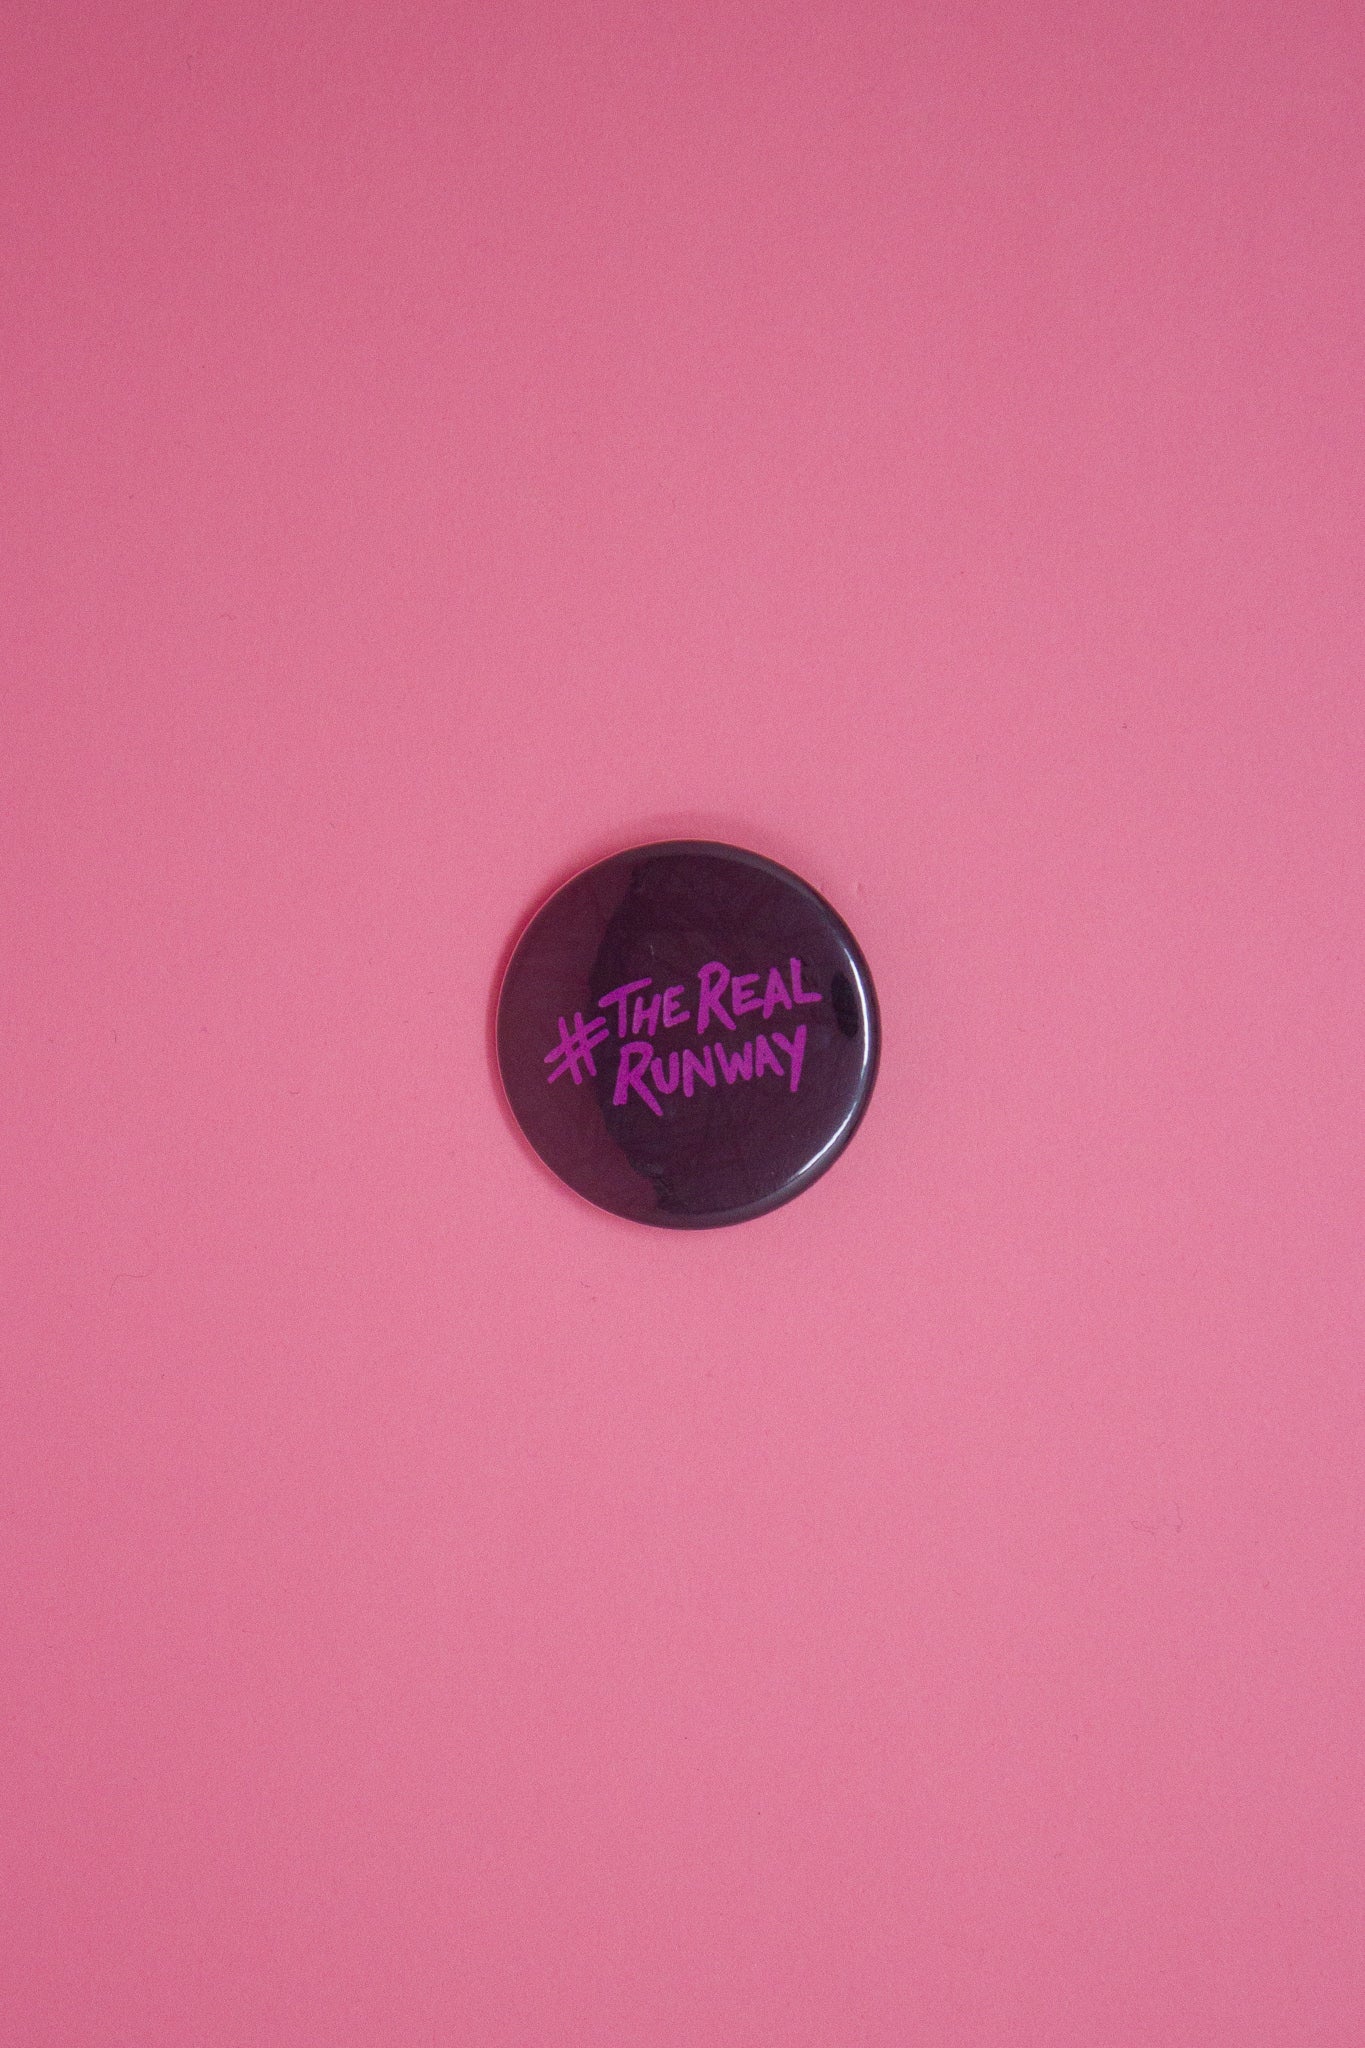 #therealrunway Button